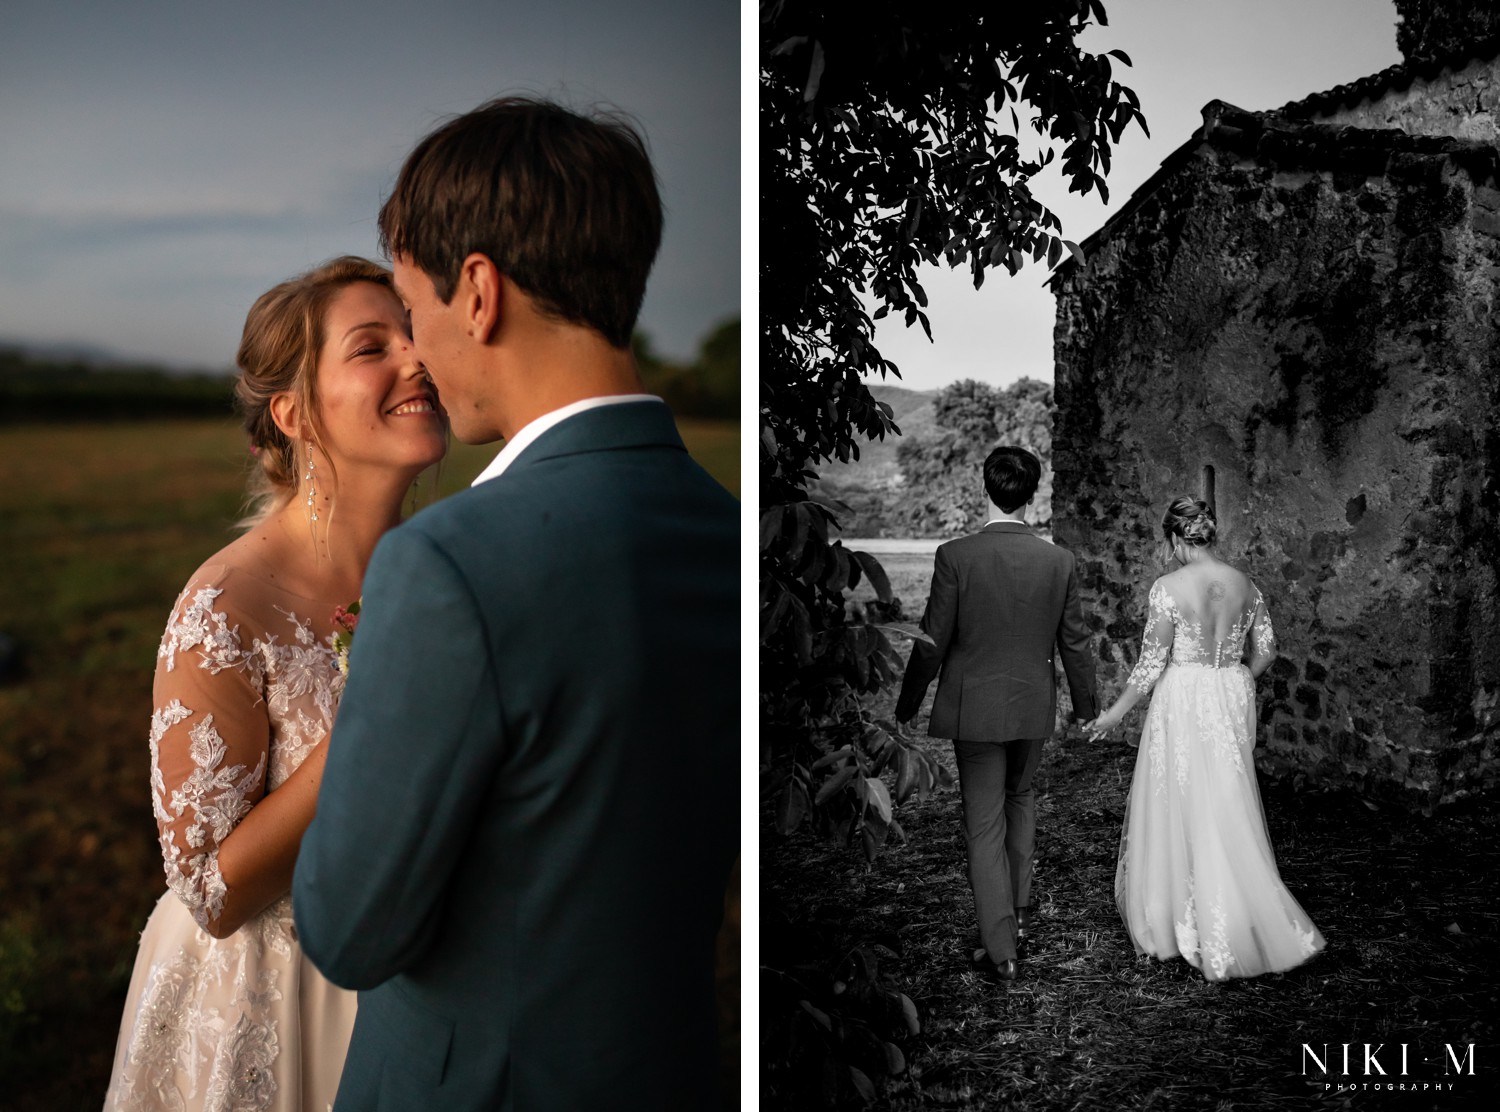 Chateau wedding in Provence France